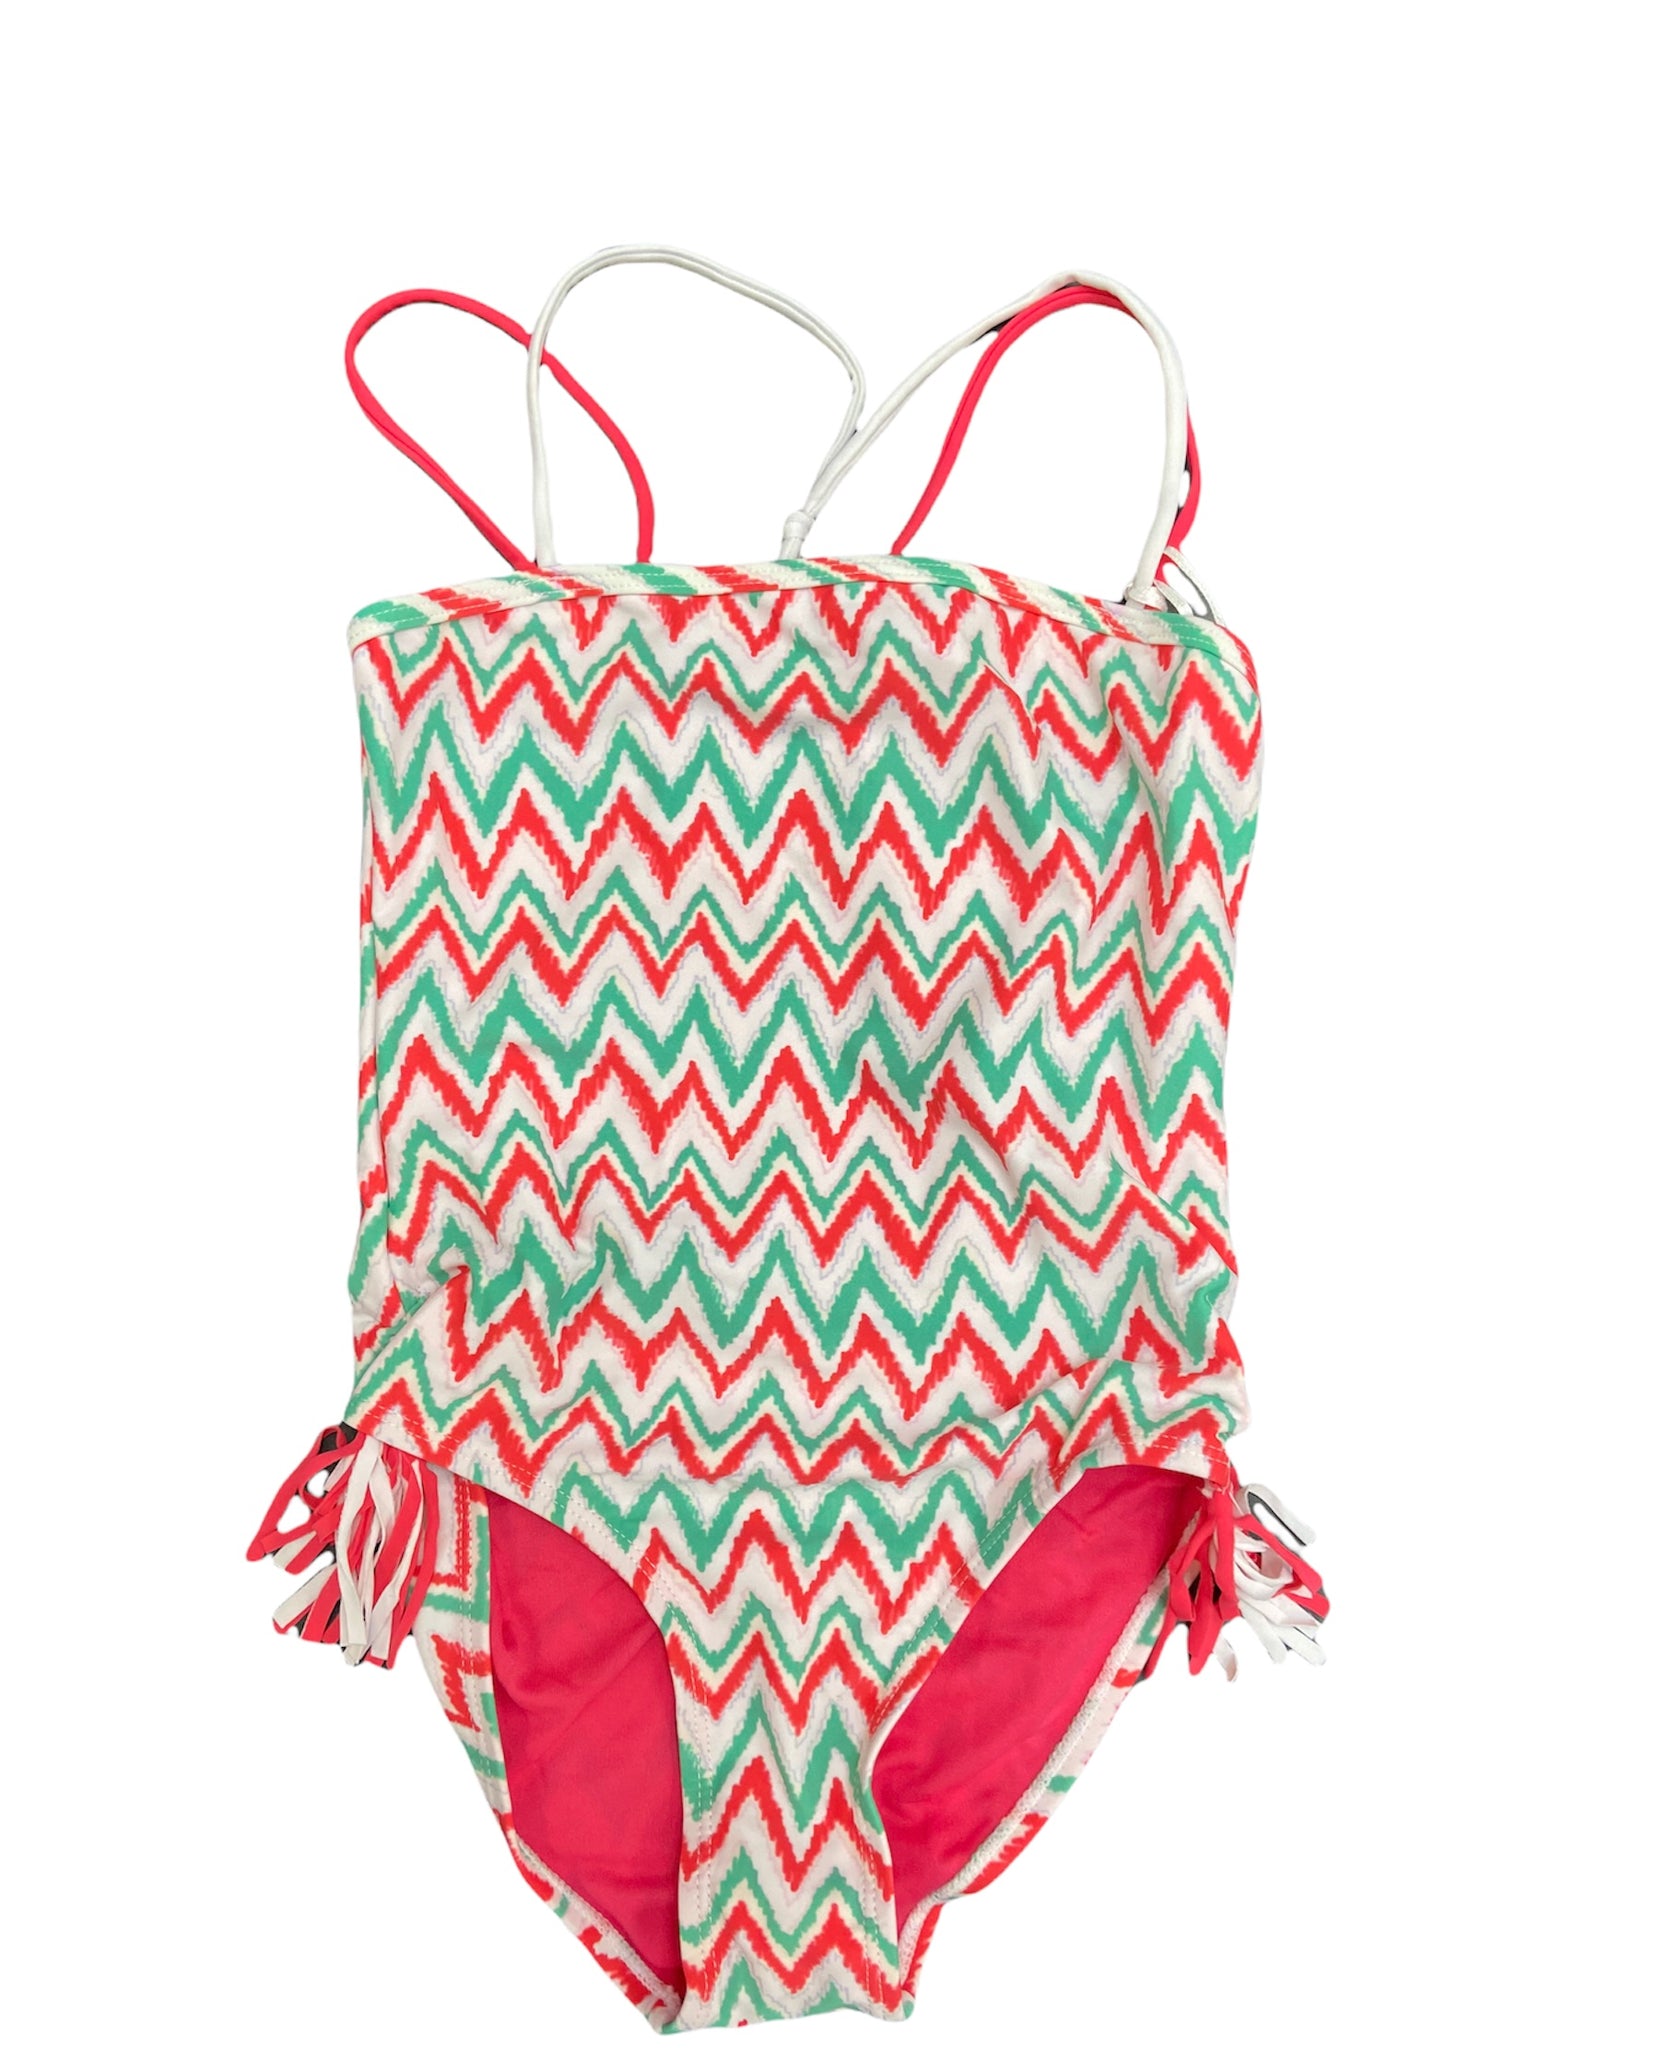 Envya White One-Piece Swimsuit with Hot Pink and Turquoise Chevron